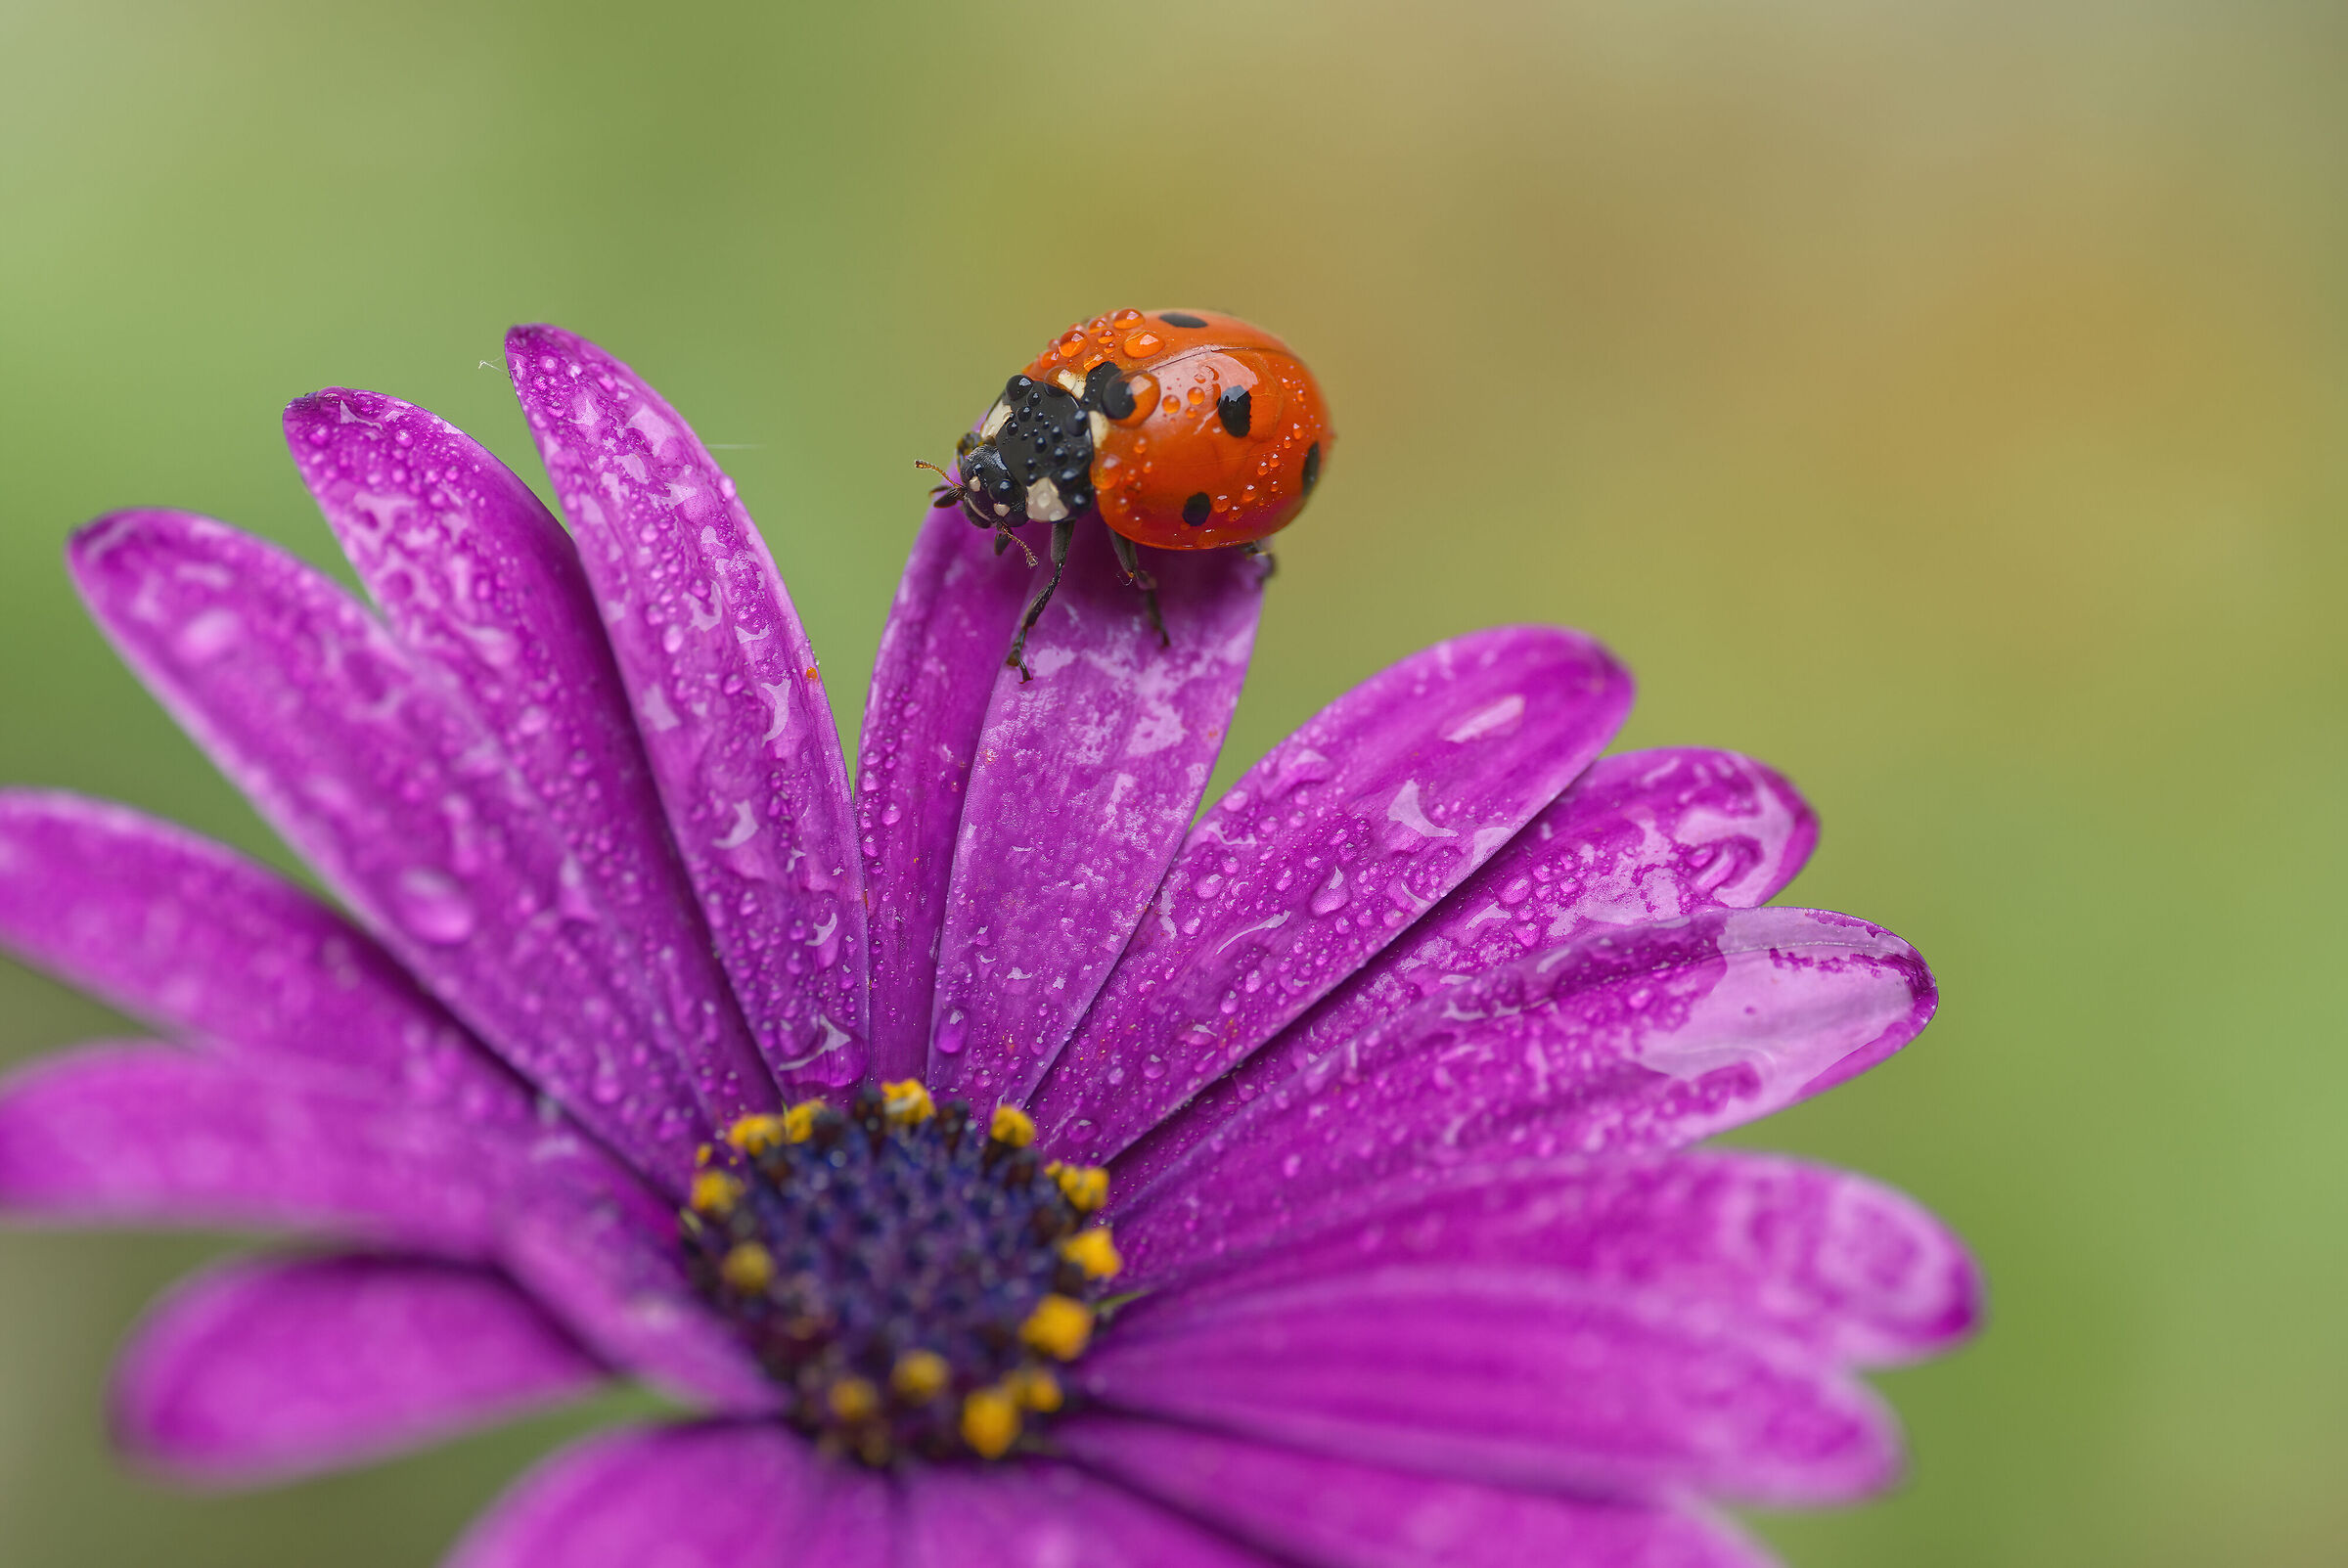 Let's say, "Even luckier wet ladybug."...